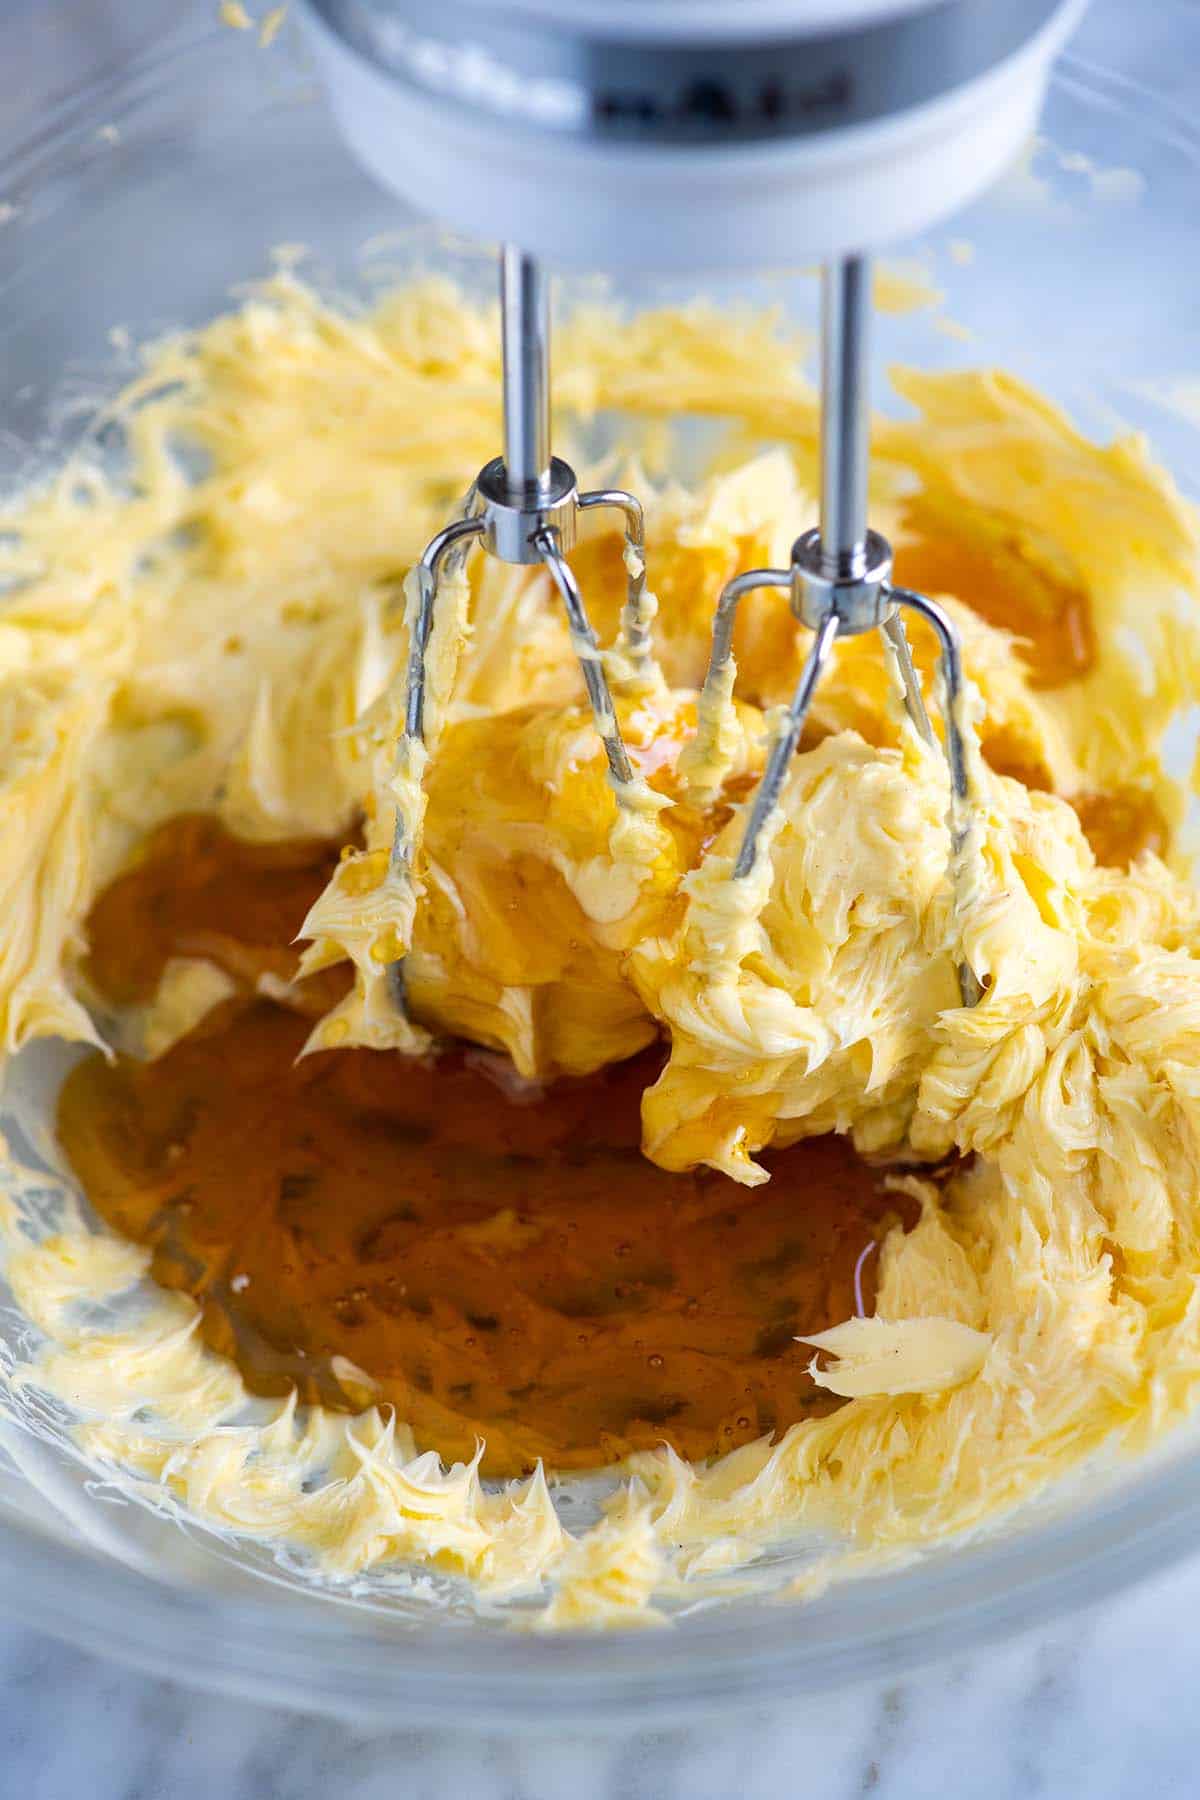 Whip honey into butter to form honey butter